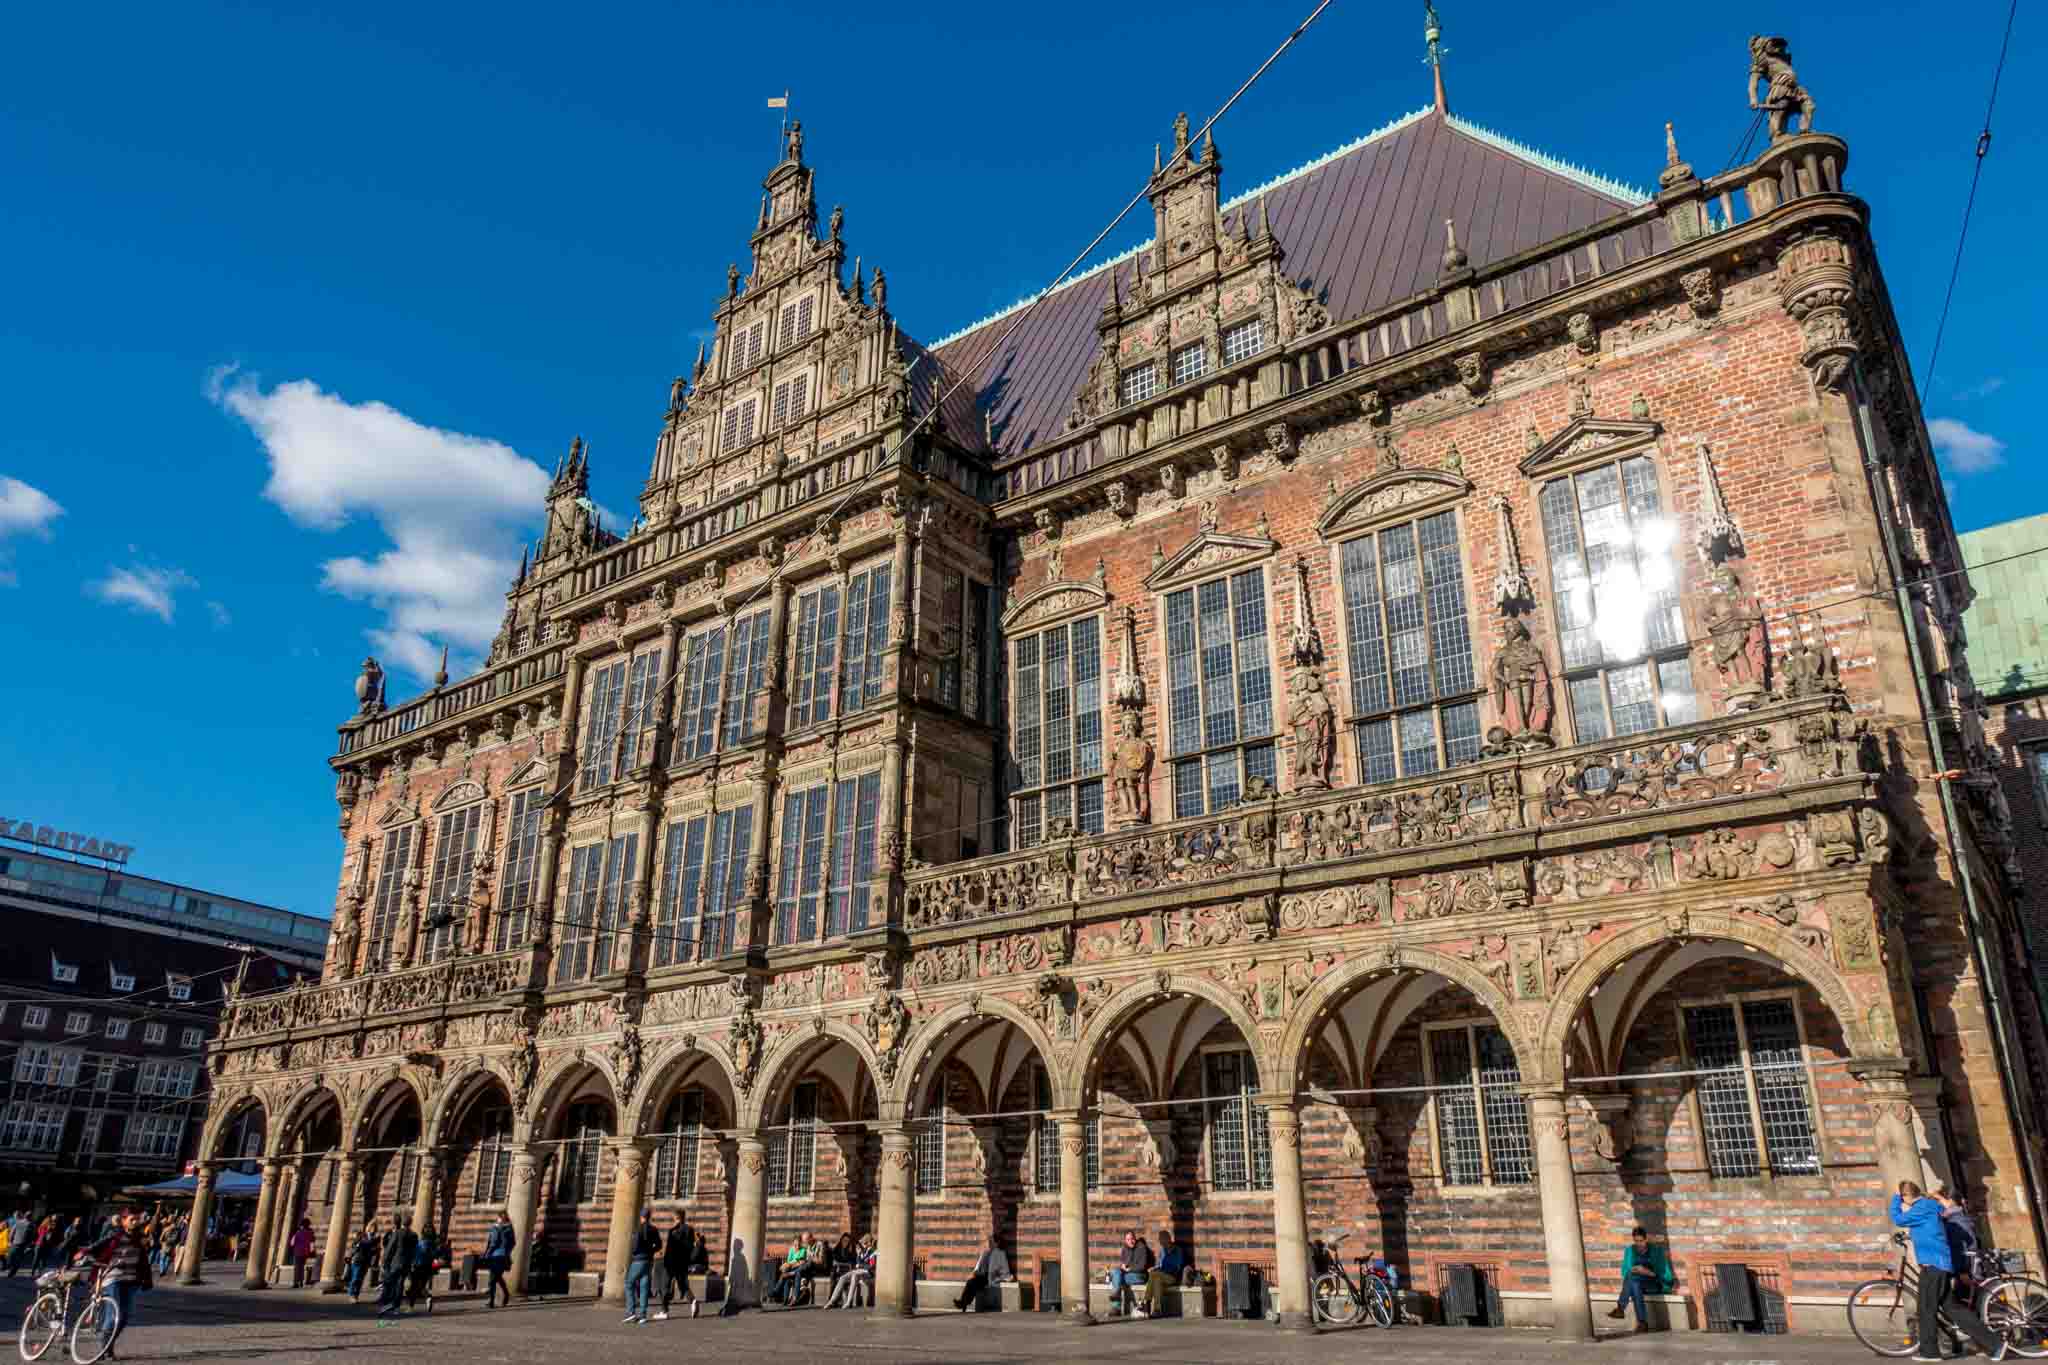 Building with numerous windows and arches, the Bremen Town Hall